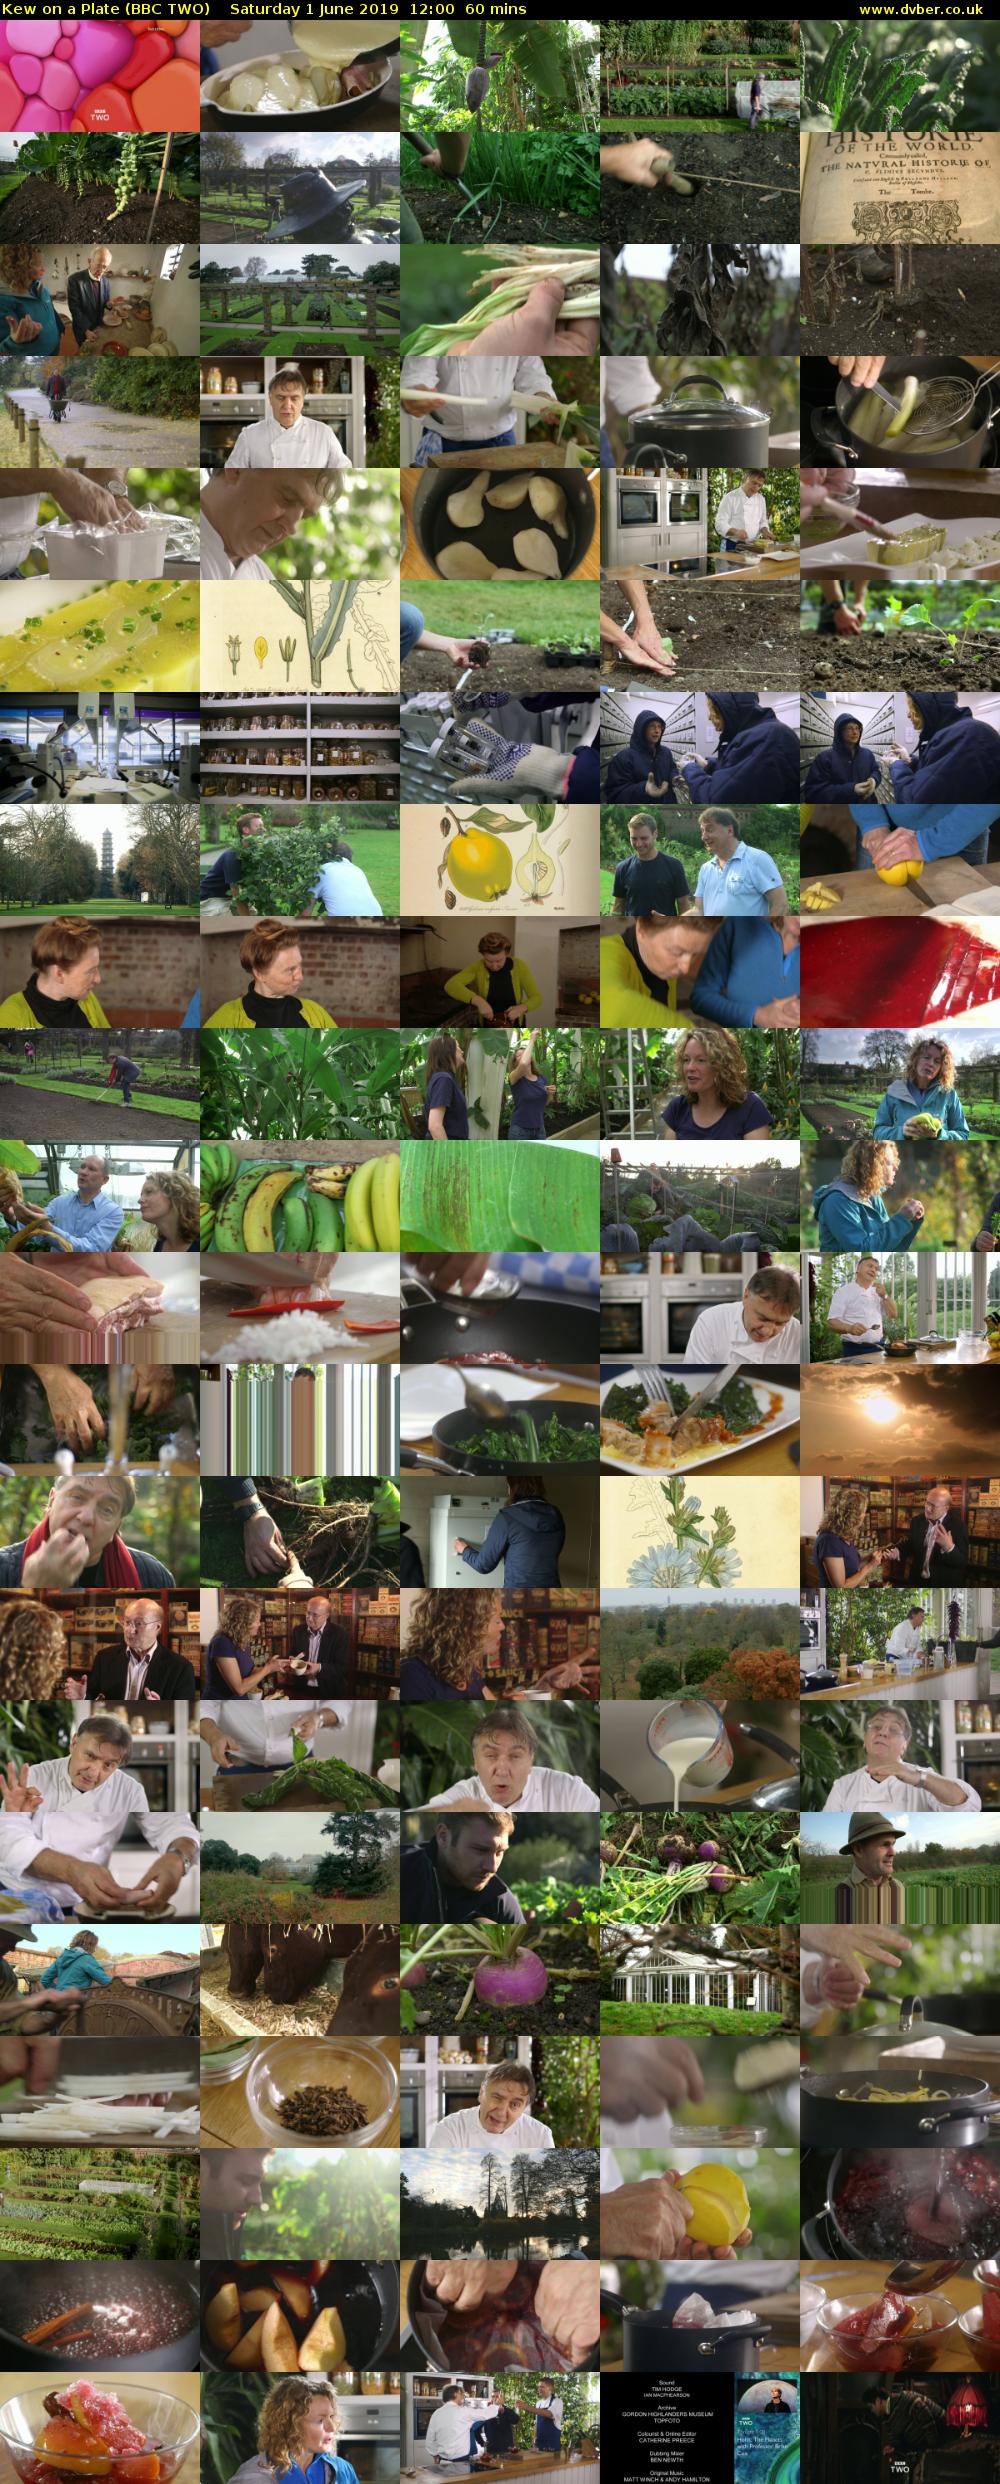 Kew on a Plate (BBC TWO) Saturday 1 June 2019 12:00 - 13:00